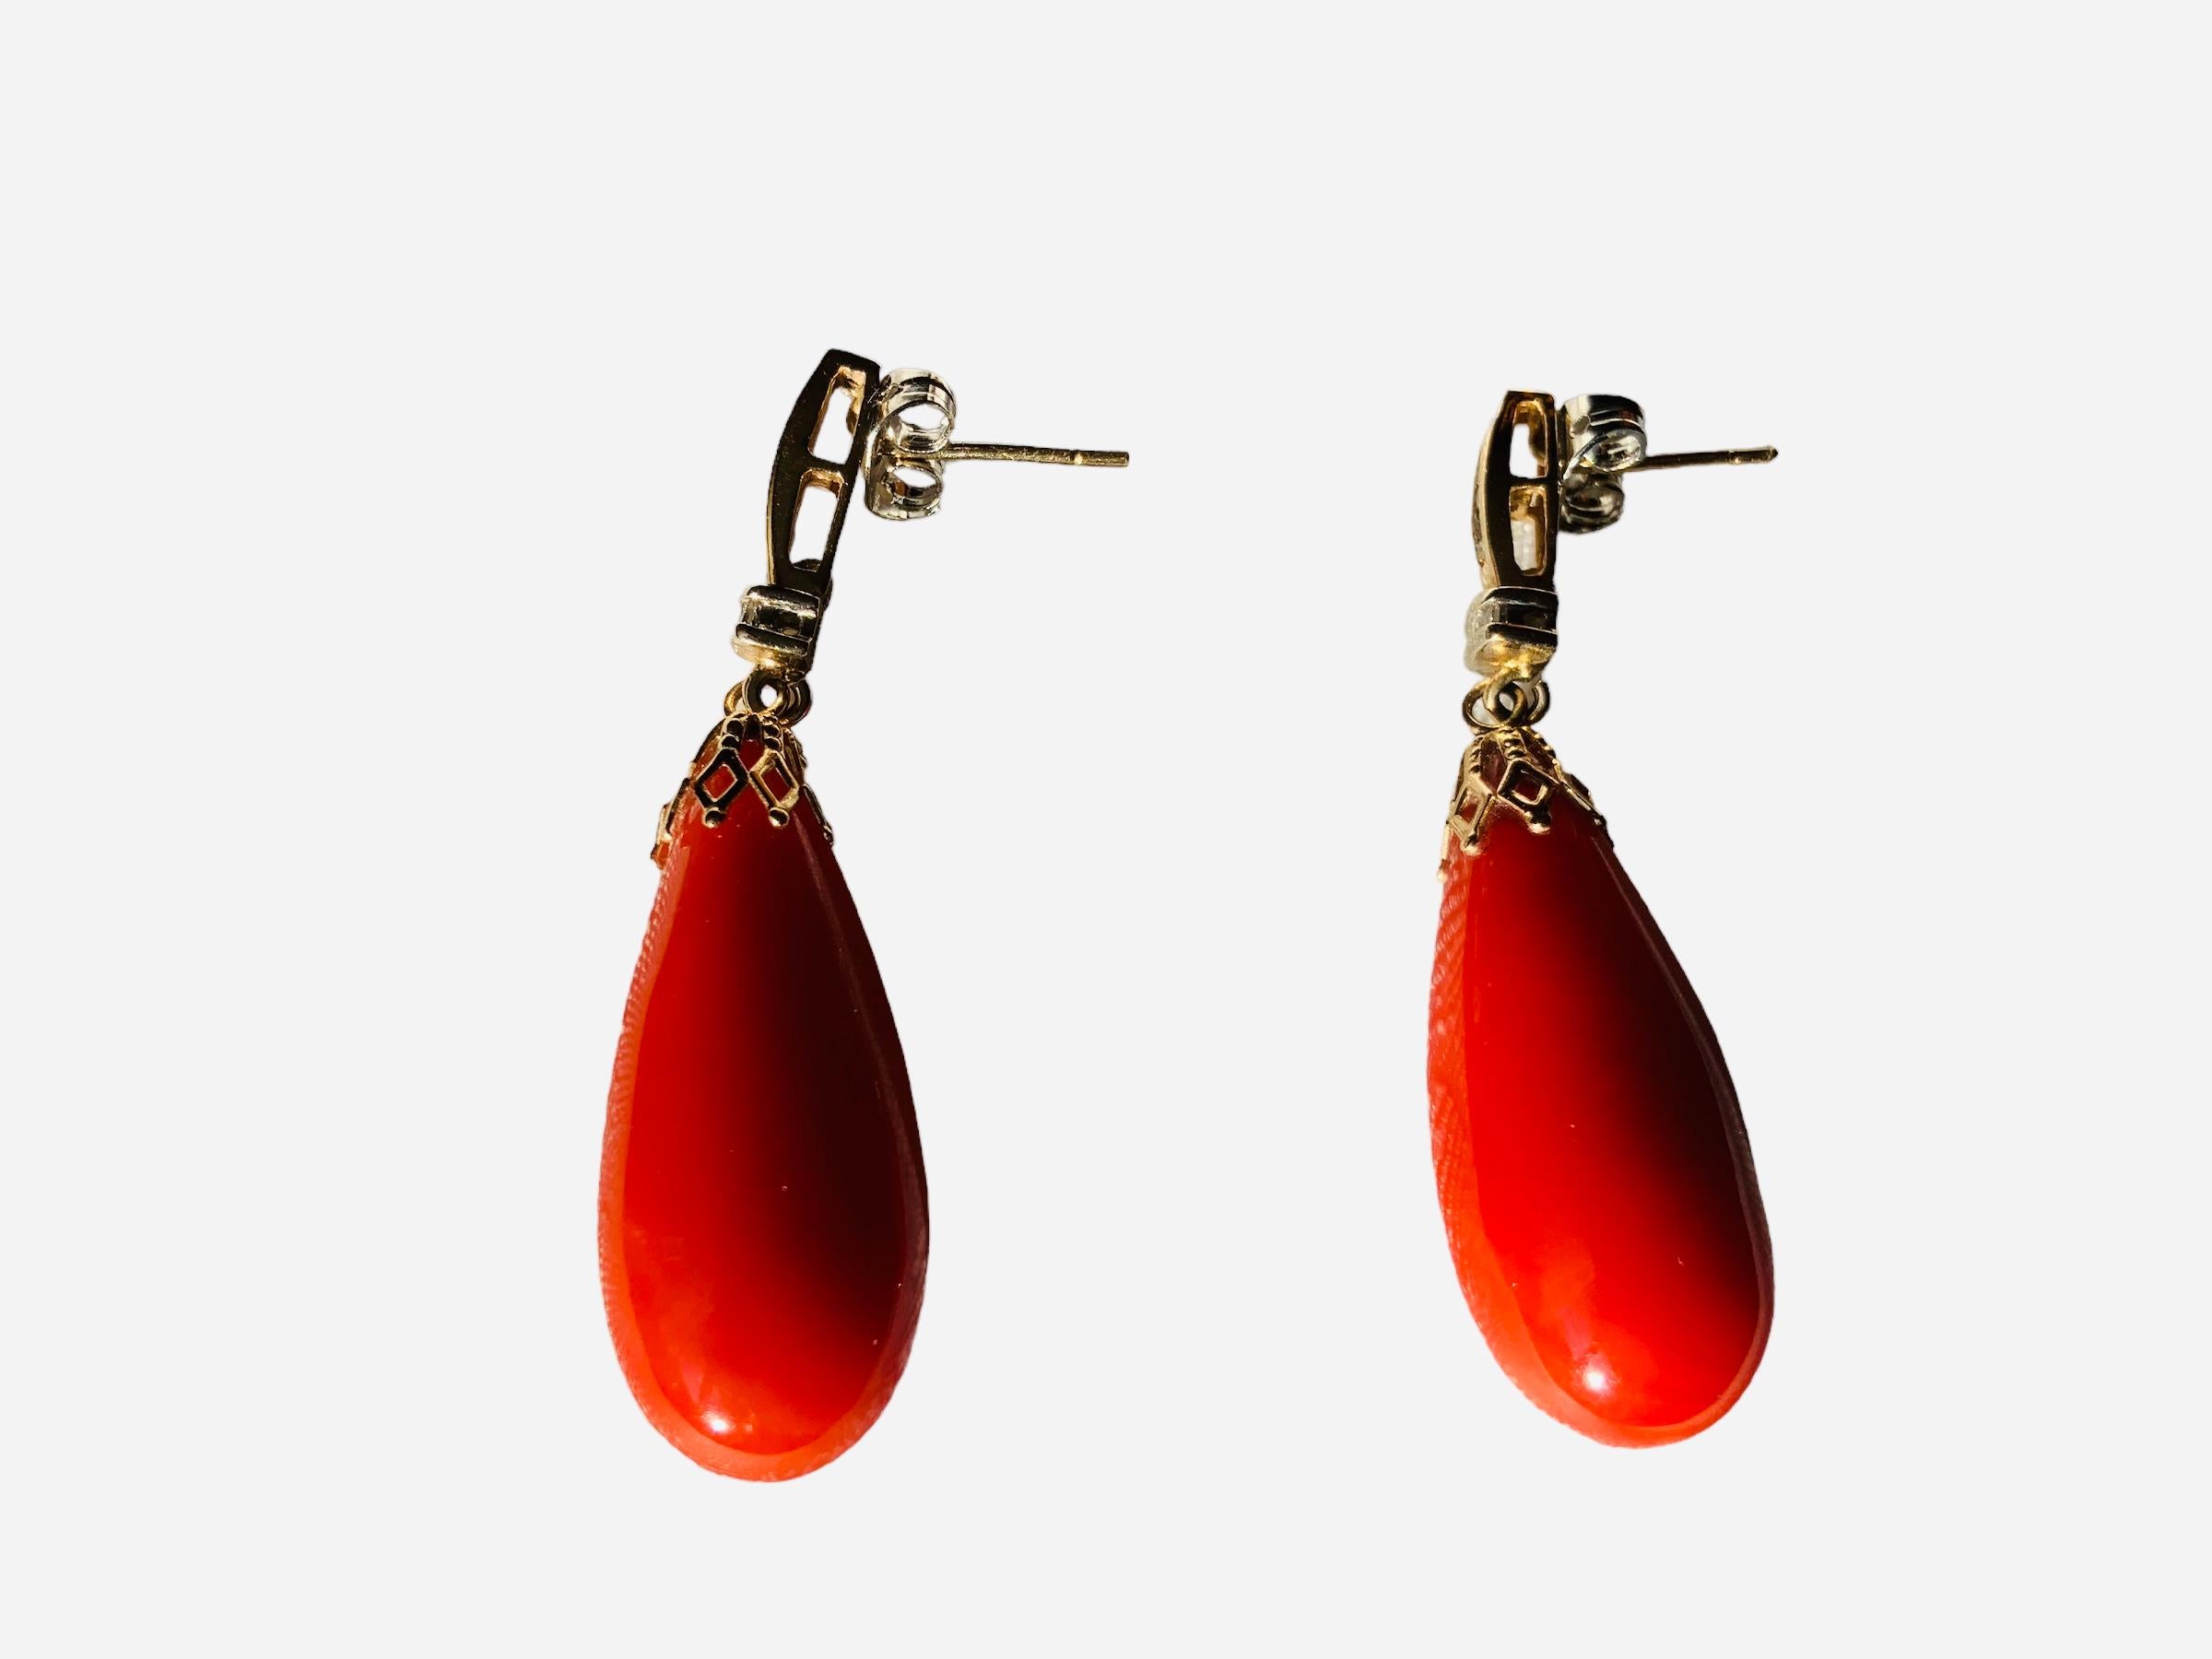 This is a Pair of 14K yellow gold Red Coral and Diamonds Drops Earrings. The coral is shaped as long tear drops mounted in 14K yellow gold with pression back. They contain 16 diamonds weighing 0.20 carats.